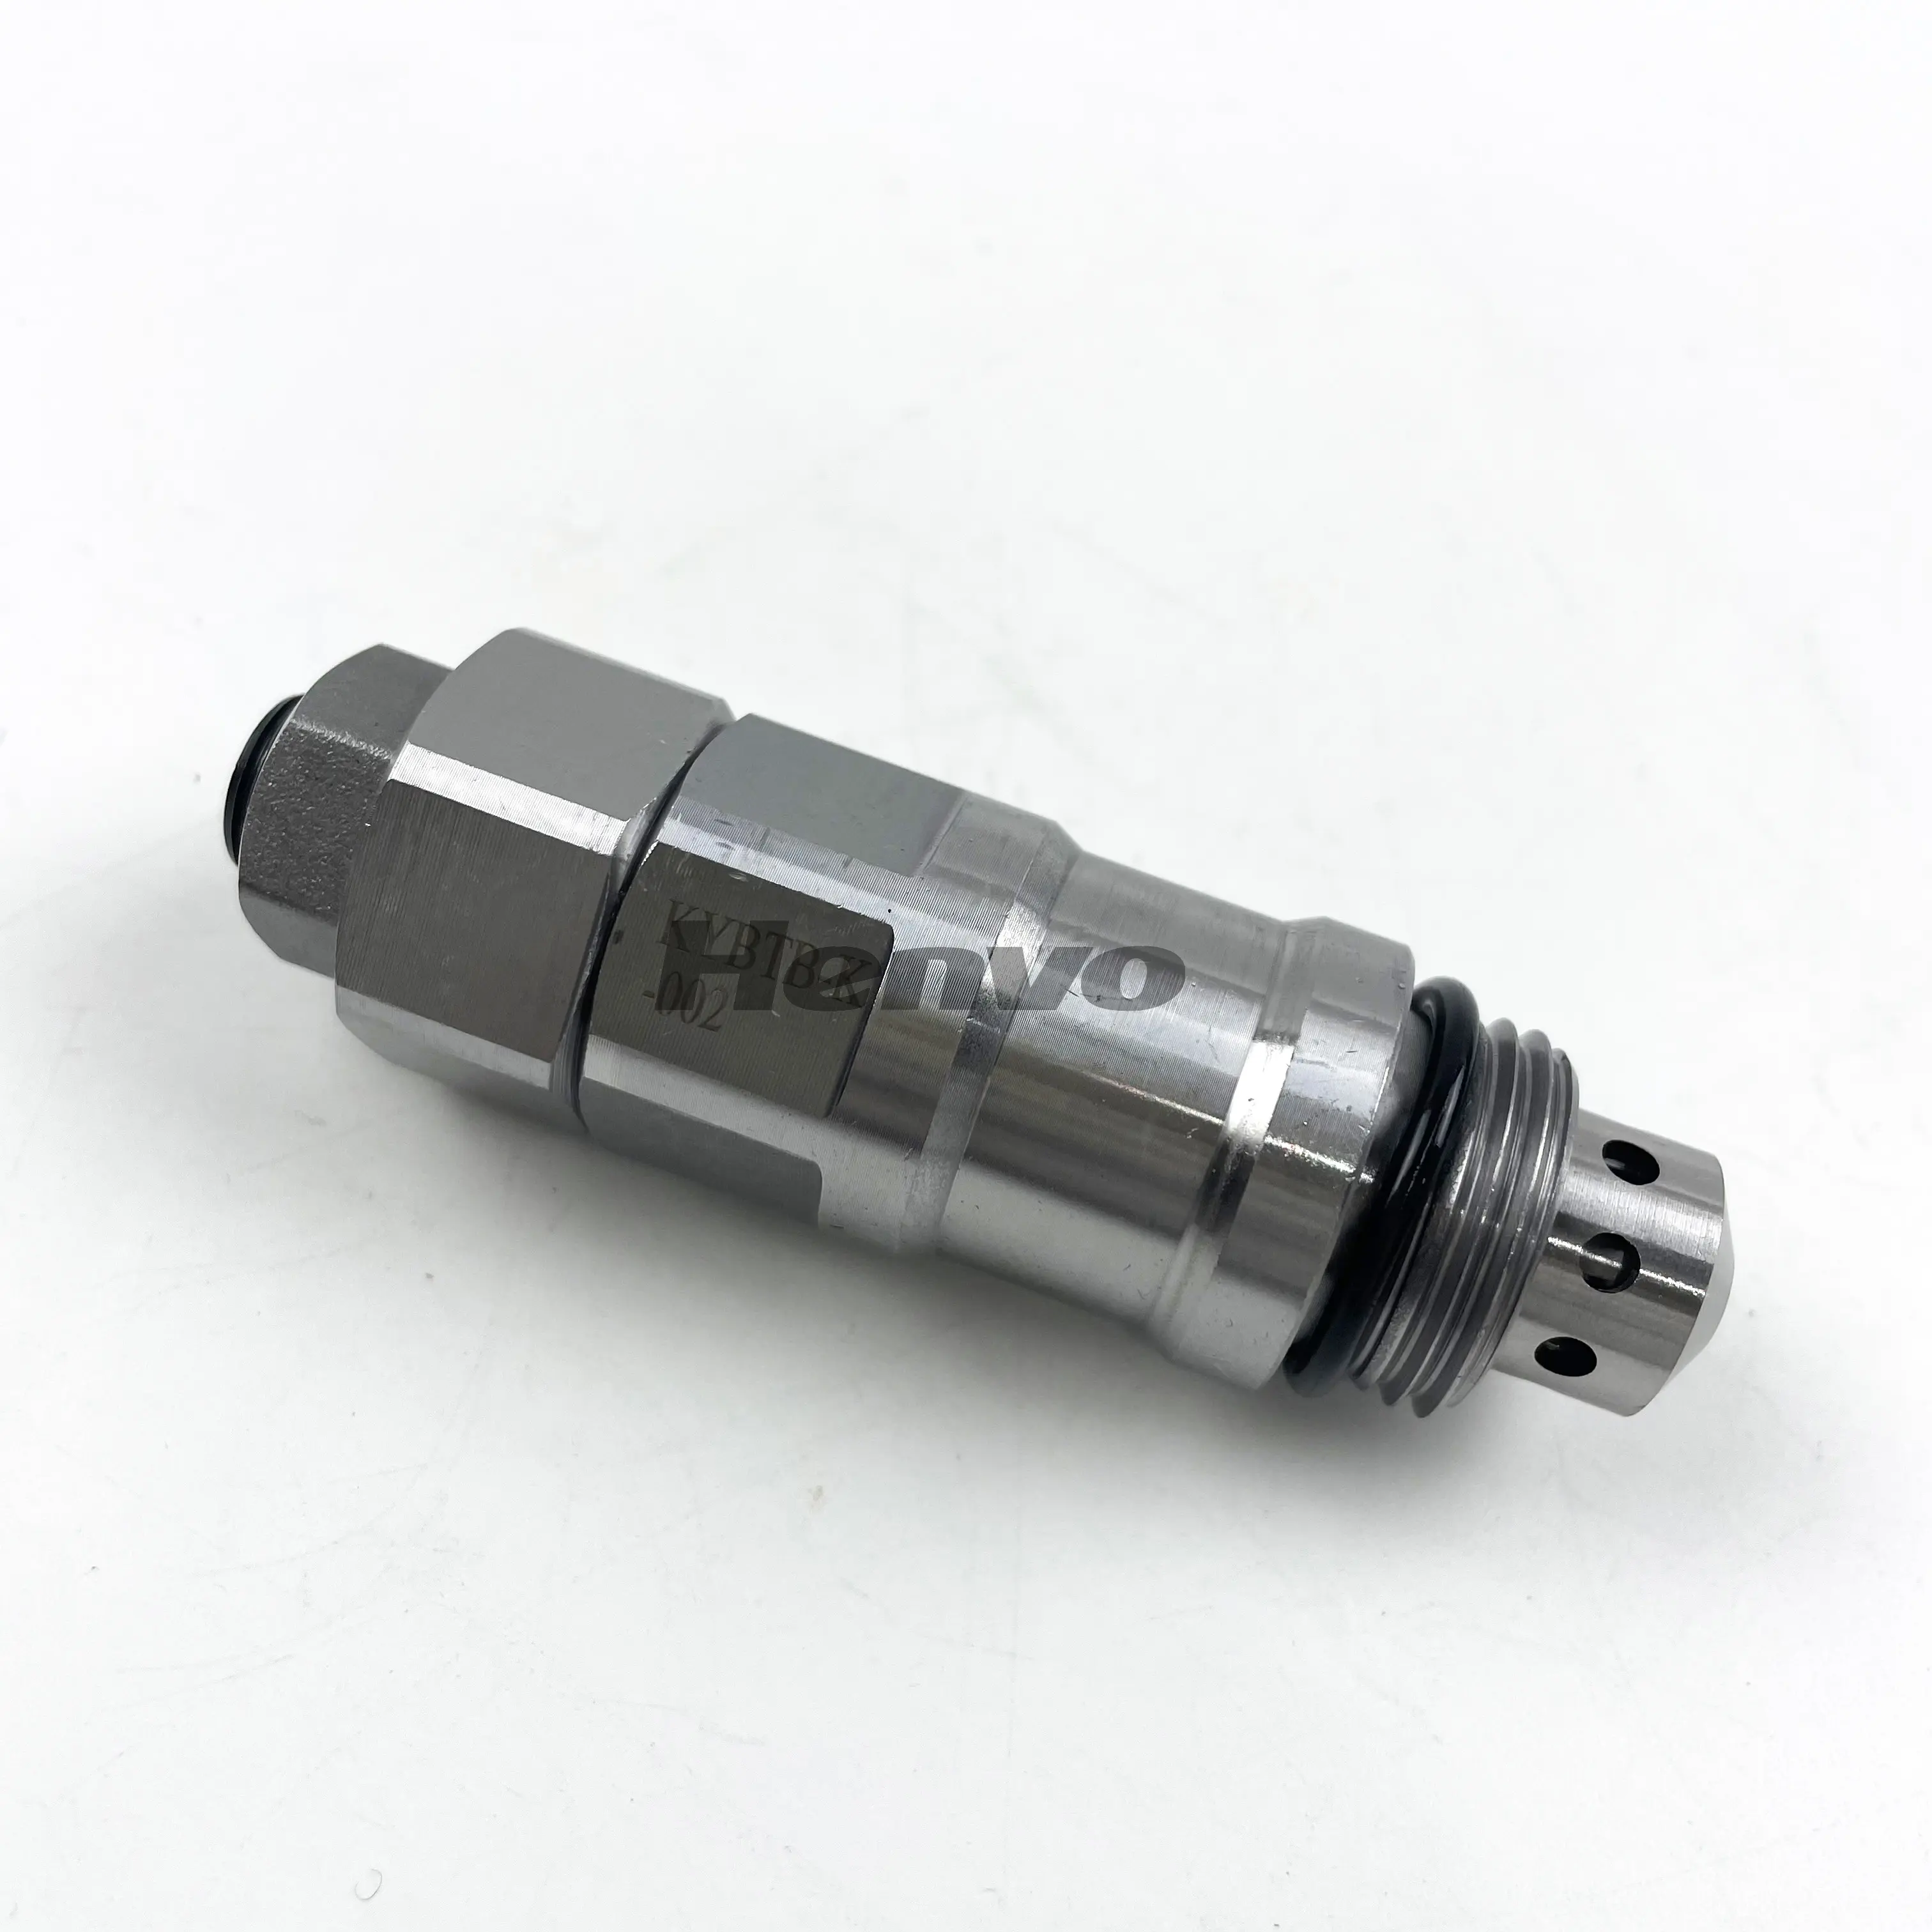 Hydraulic Relief Valve 87426717 for New Holland Loader U80C B110C U80B B95CTC U80 B90B LV80 B95C B110B B95B B95CLR